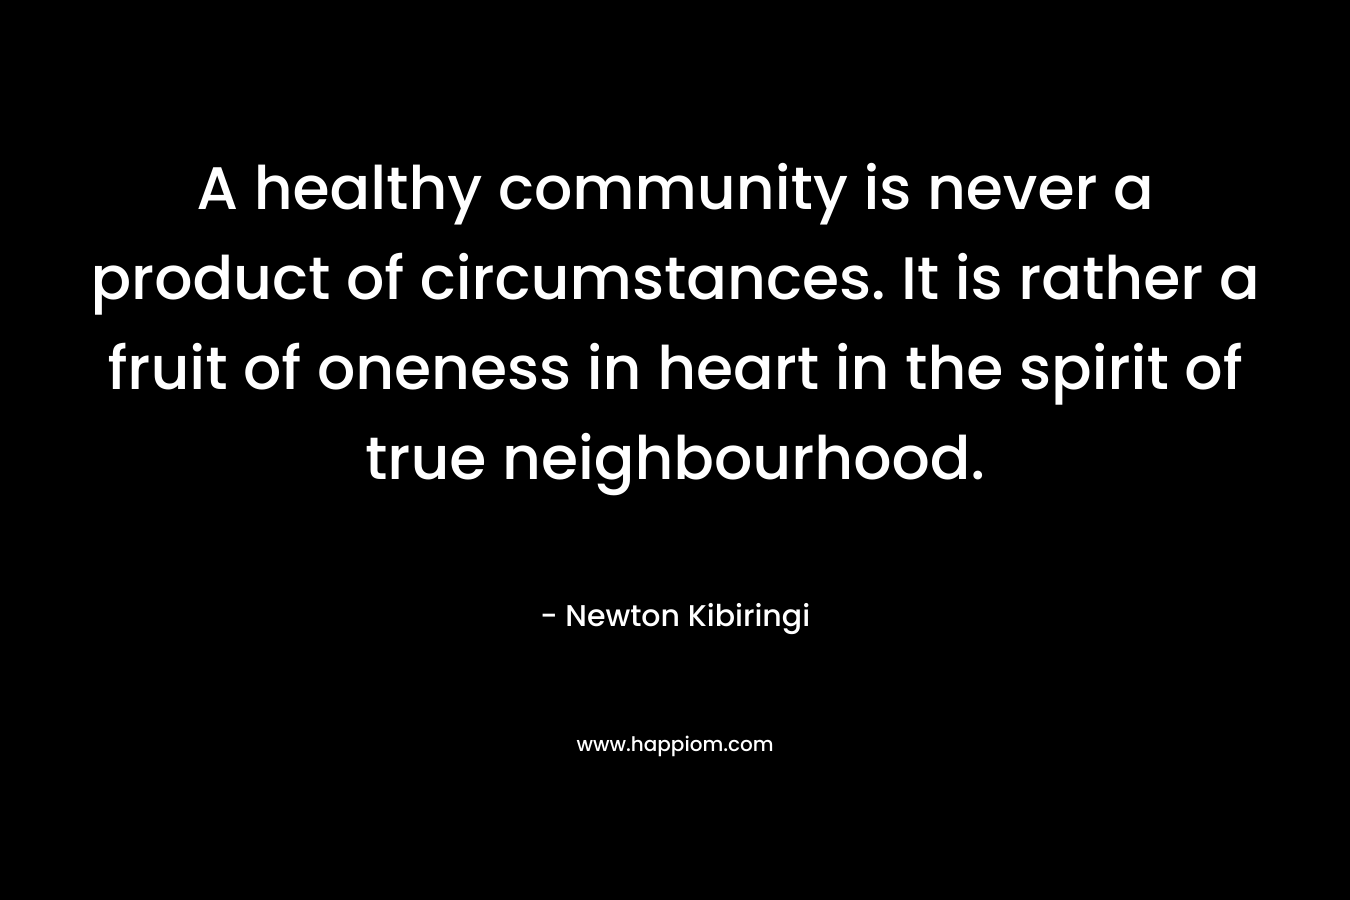 A healthy community is never a product of circumstances. It is rather a fruit of oneness in heart in the spirit of true neighbourhood. – Newton Kibiringi